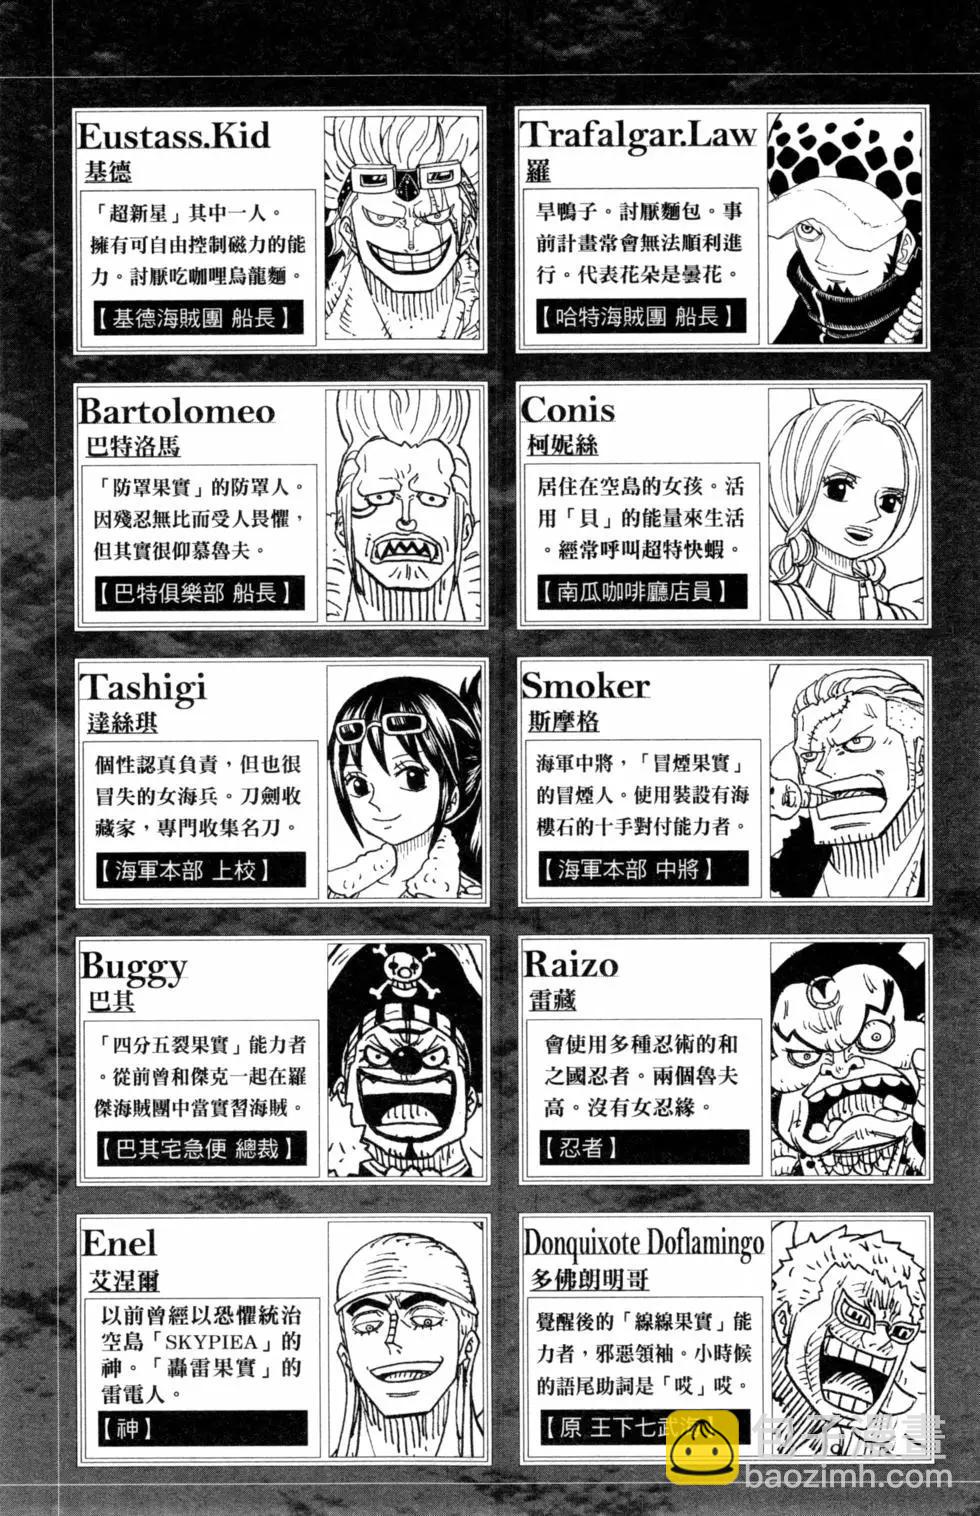 One piece party - 第06卷(1/4) - 6